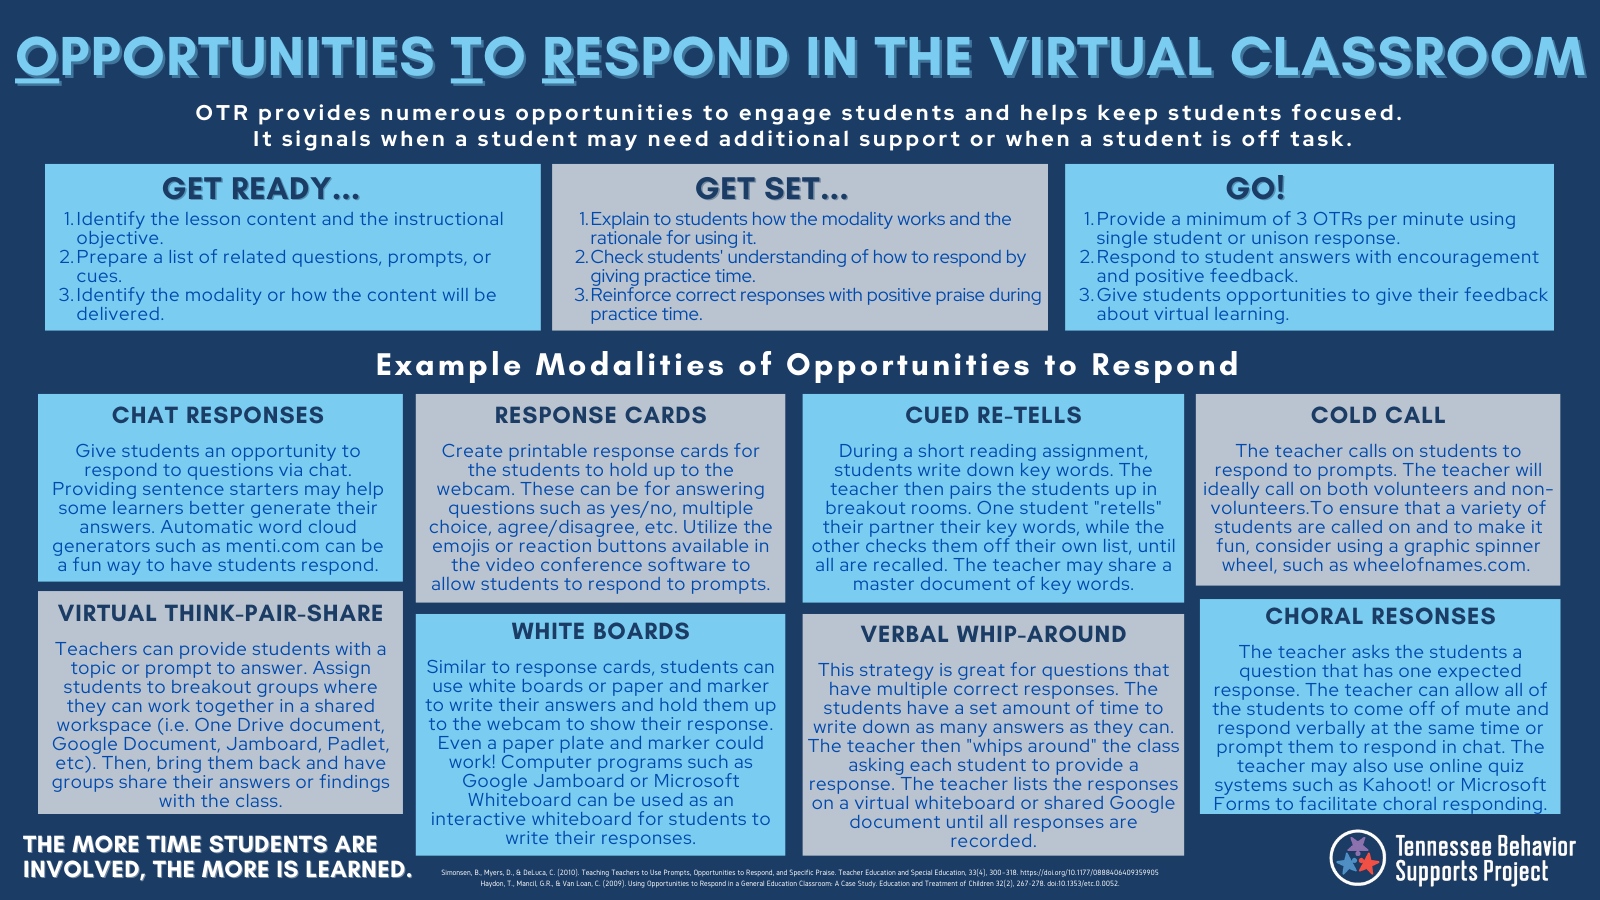 This image displays a variety of tips and tricks for virtual OTR.